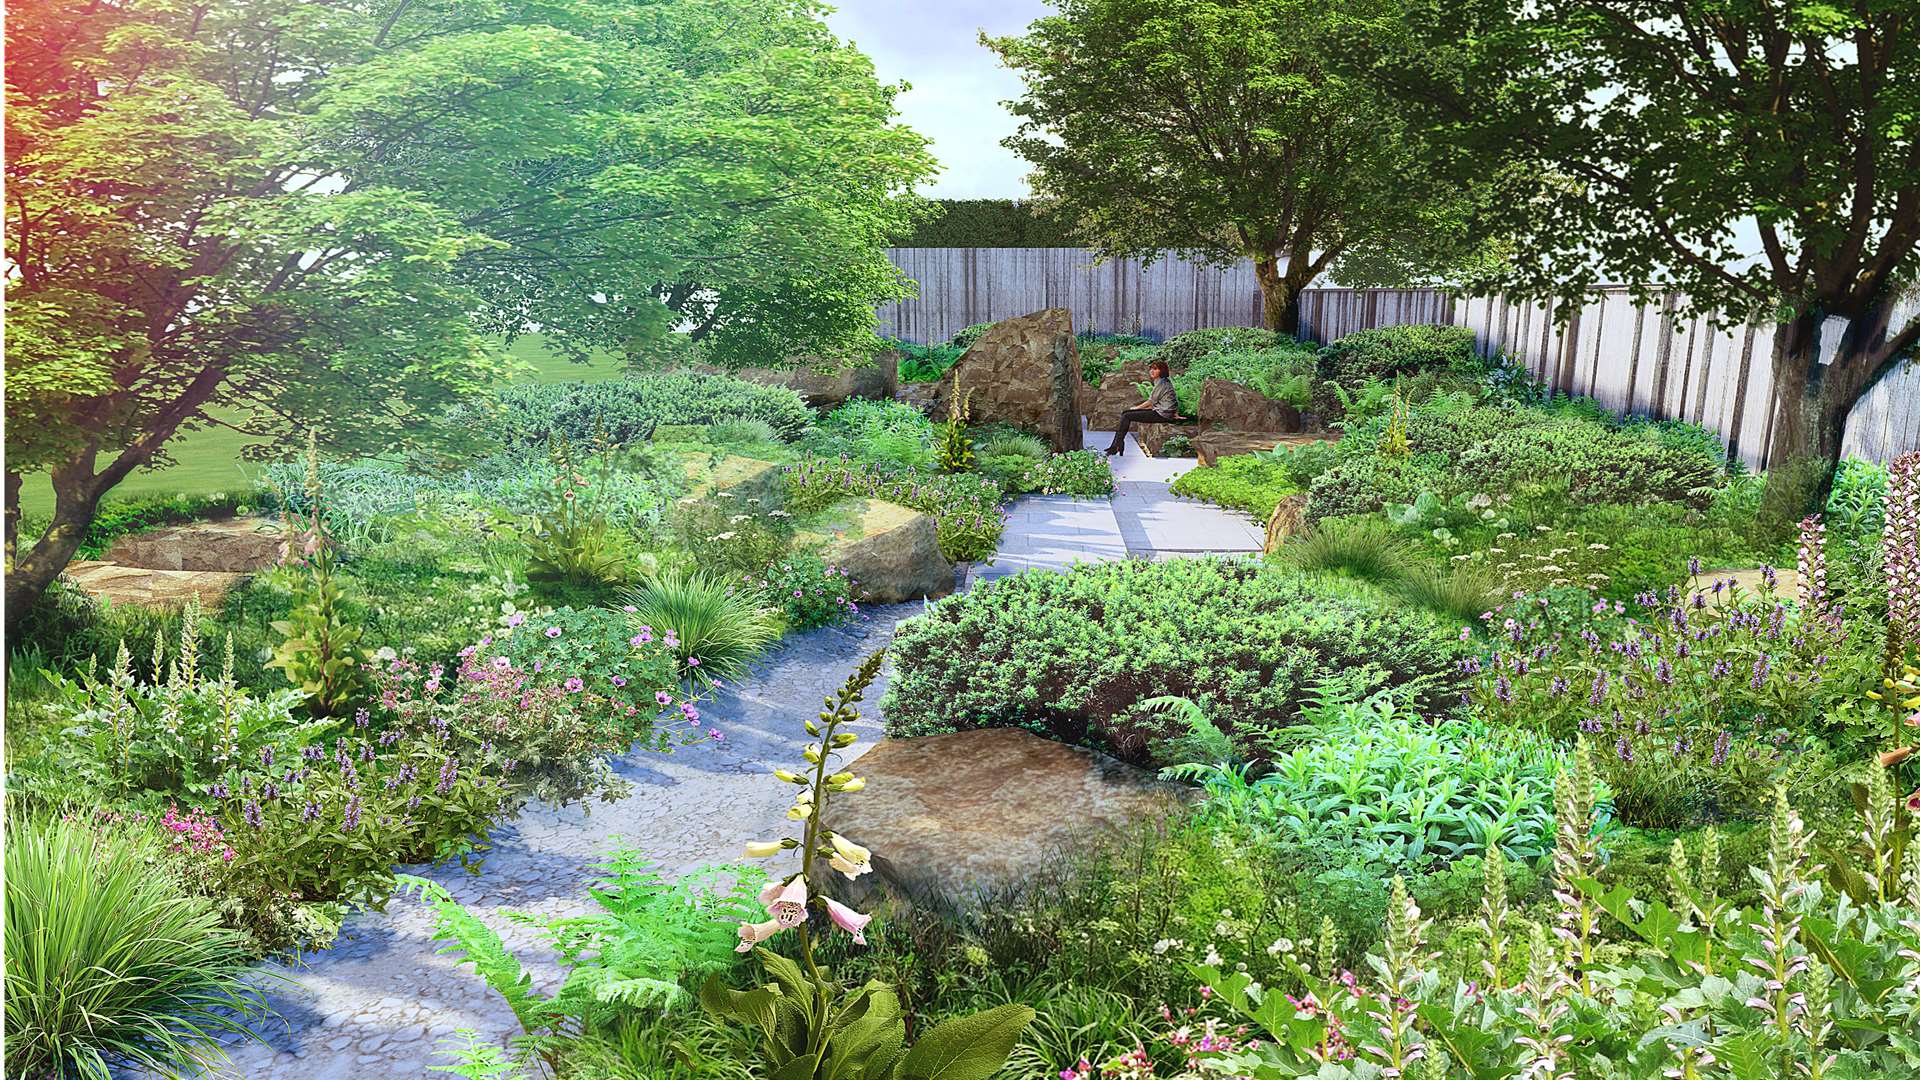 The M&G Garden 2016 for the main sponsor at this year’s RHS Chelsea Flower Show